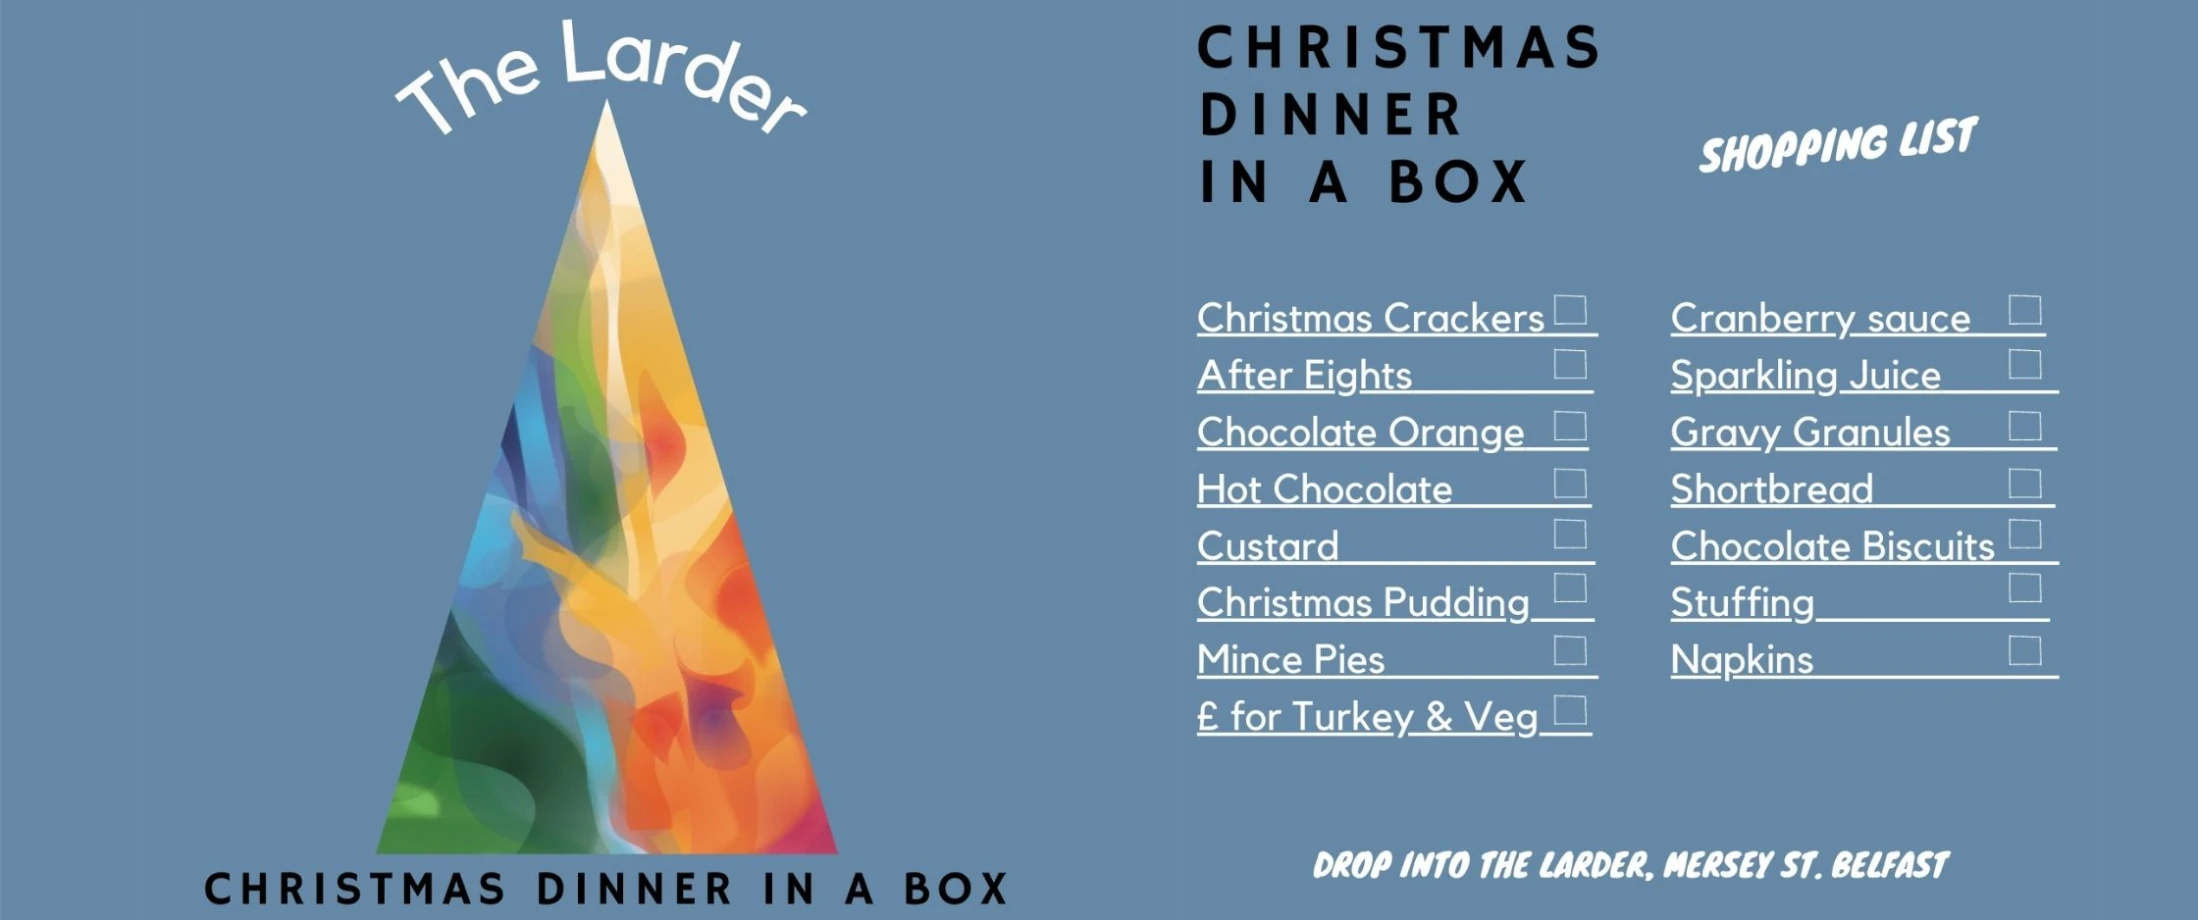 Give ‘Christmas Dinner in a Box’